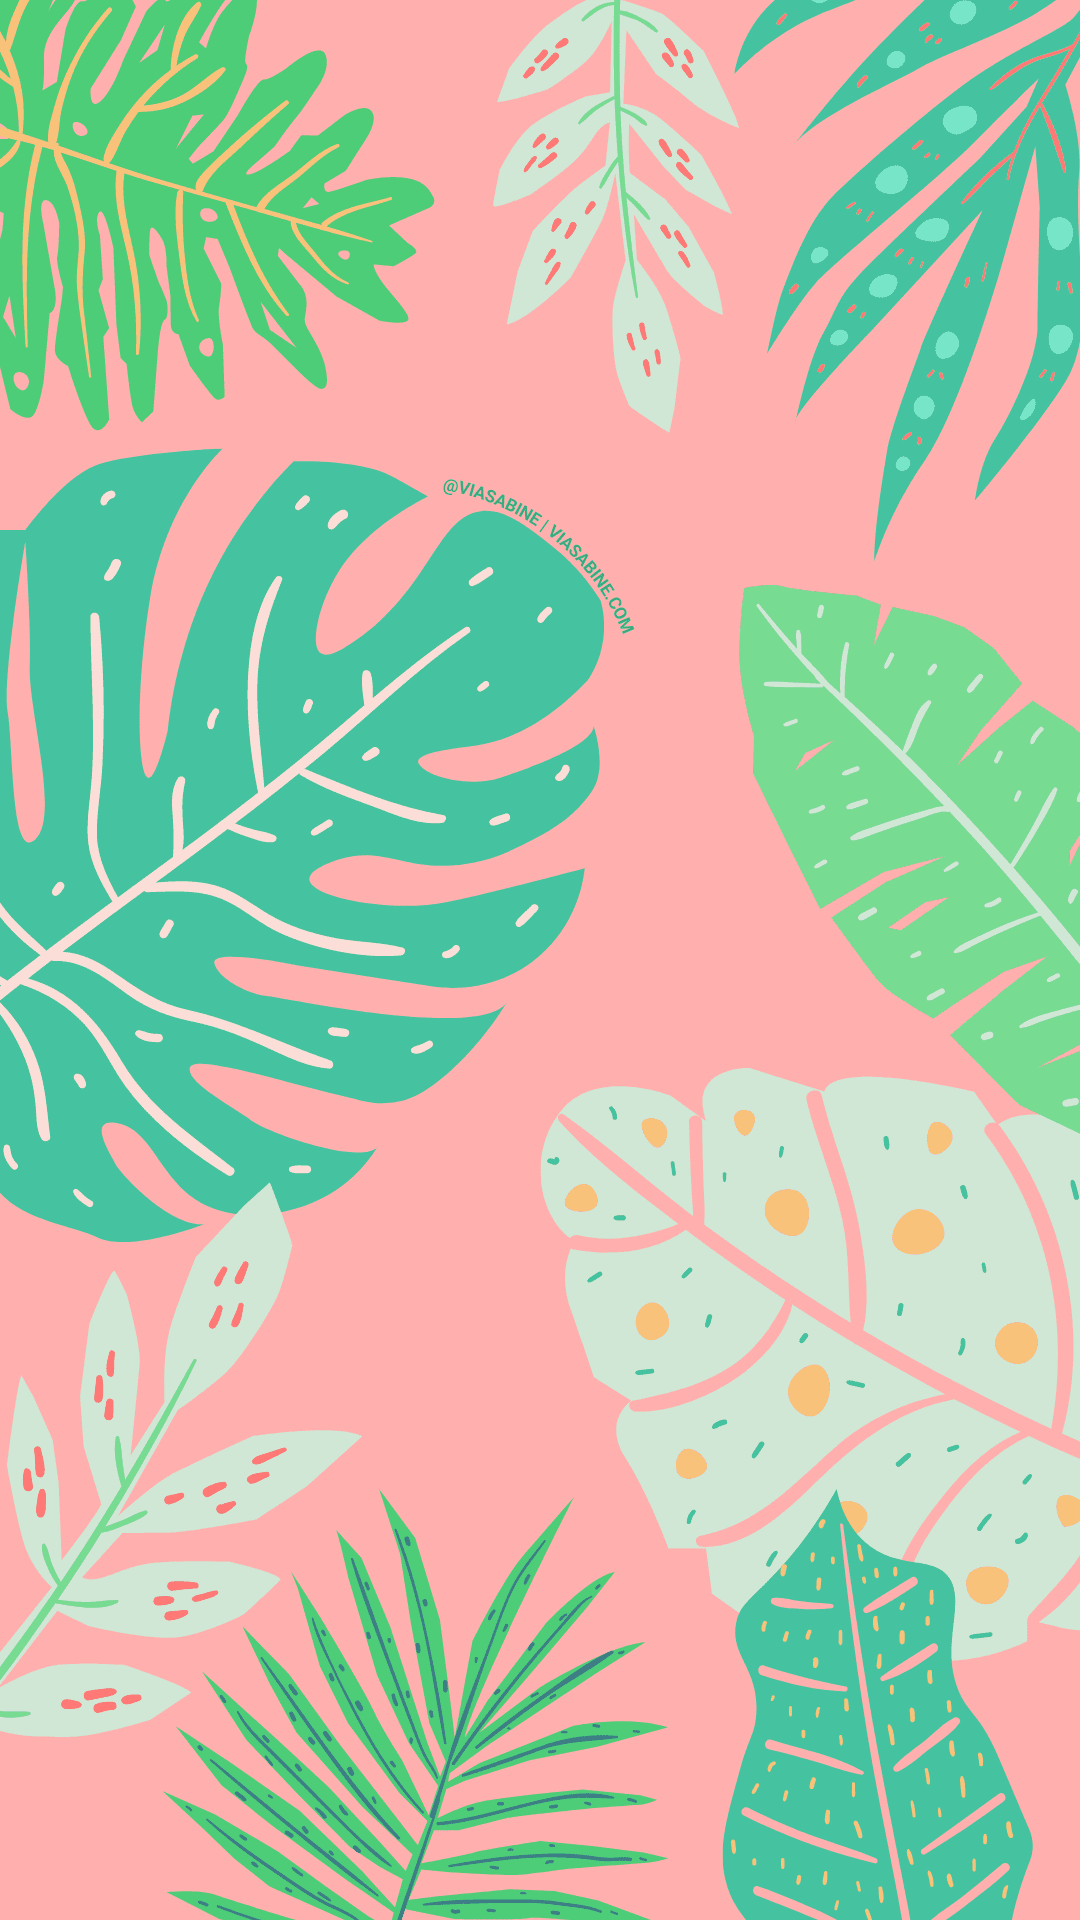 A pattern of tropical leaves on pink background - Phone, leaves, Monstera, nurse, teal